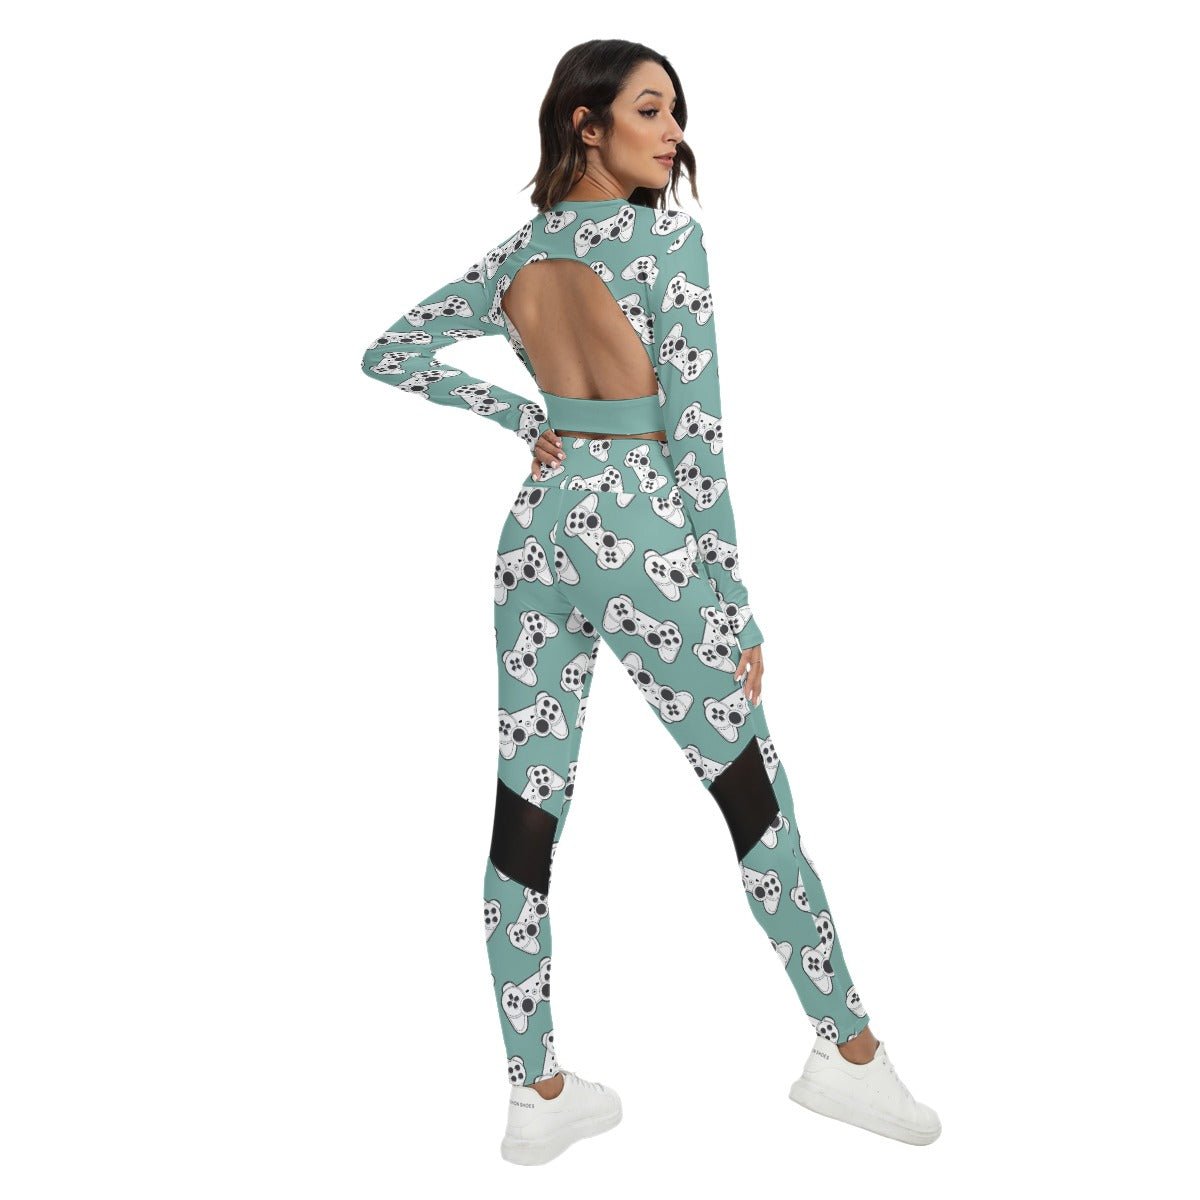 Gamer Girl Print Women's Sport Set With Backless Top And Leggings, 2 Pc Matching Set - kayzers